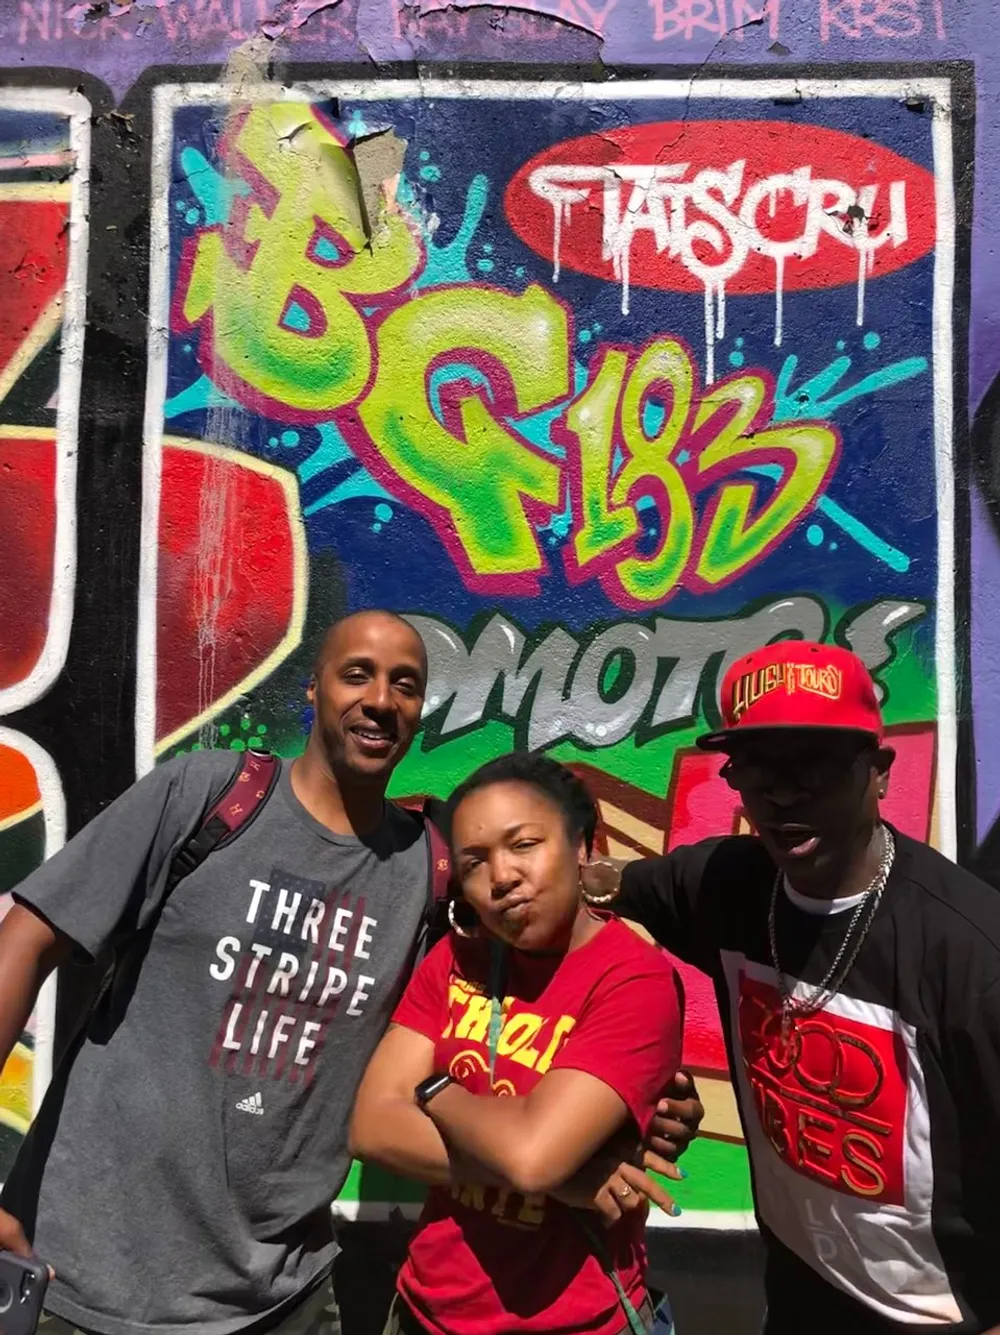 Three people are posing with confident expressions in front of a colorful graffiti wall